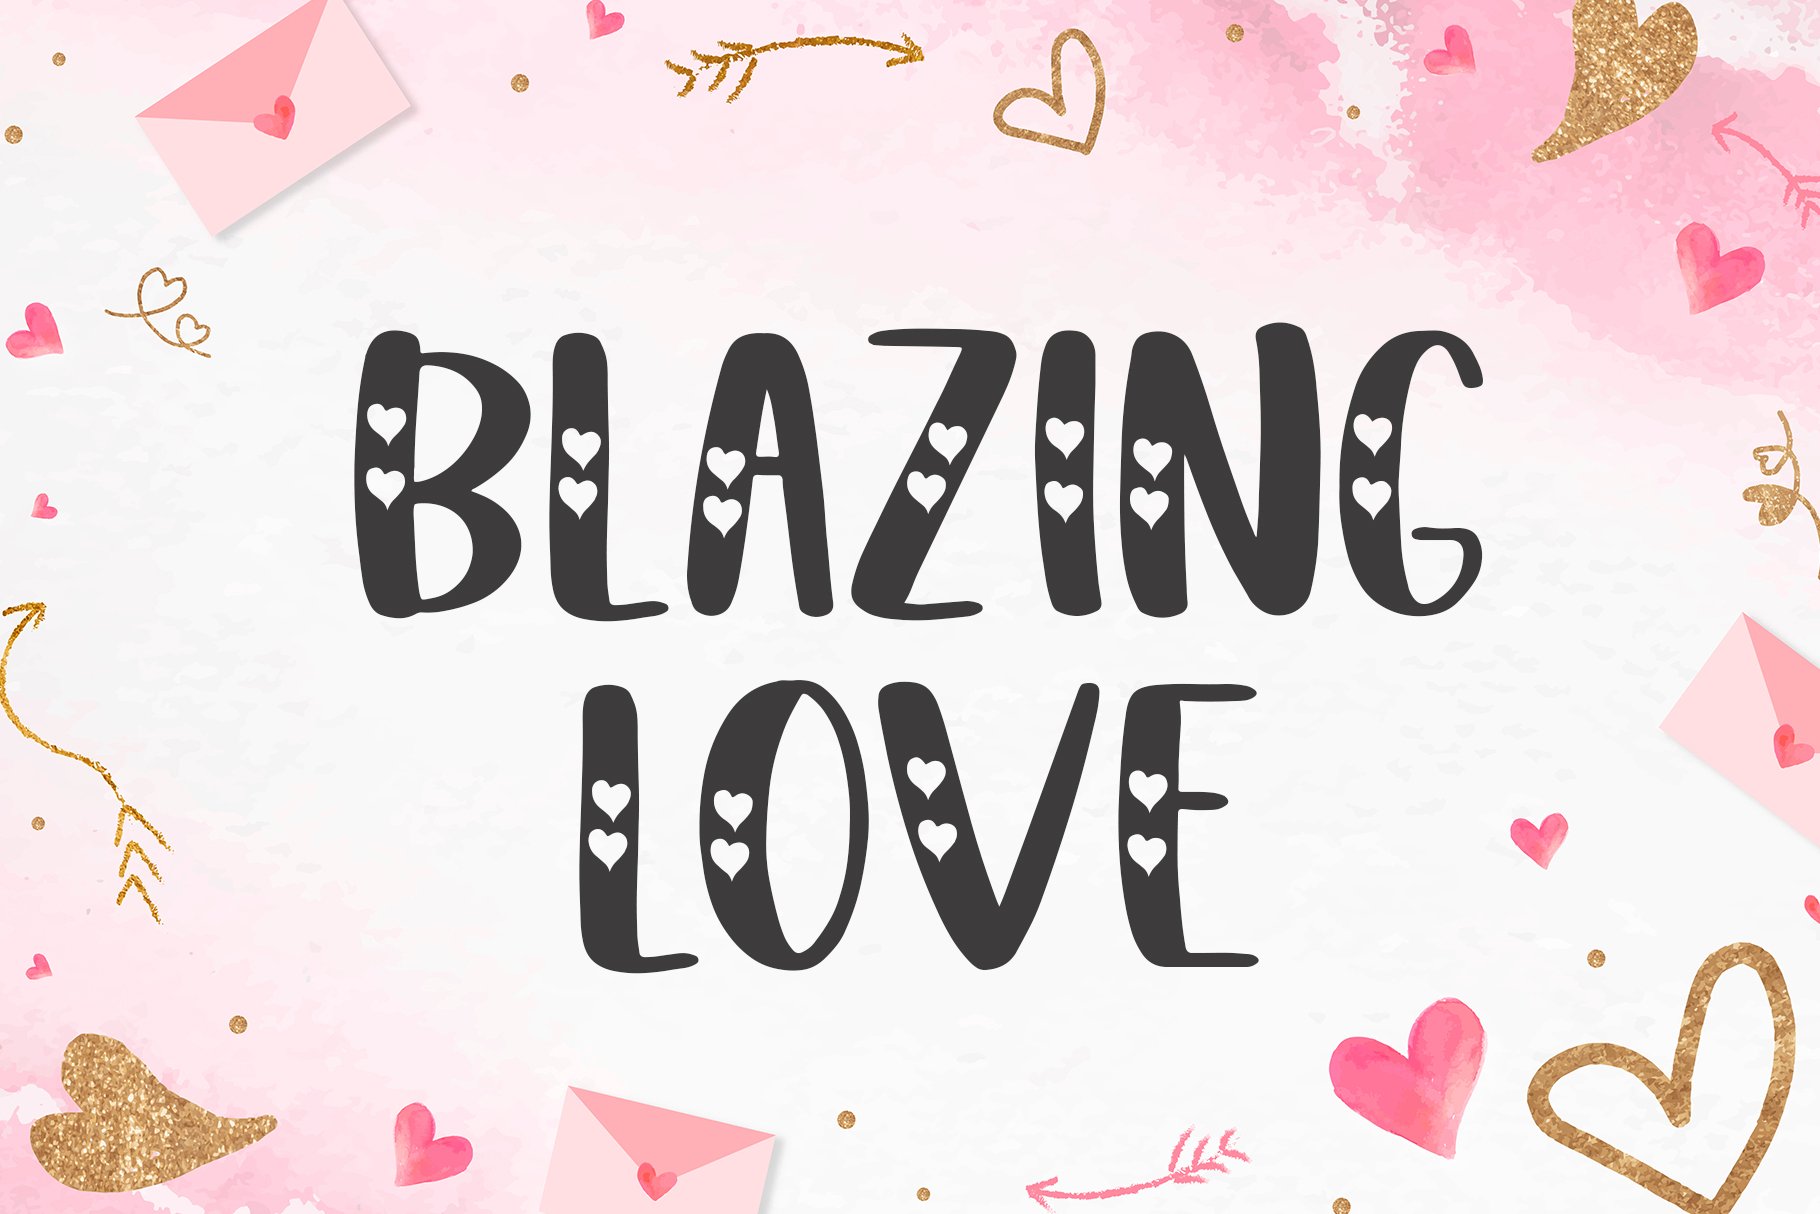 Blazing Love | Cute Display Font cover image.